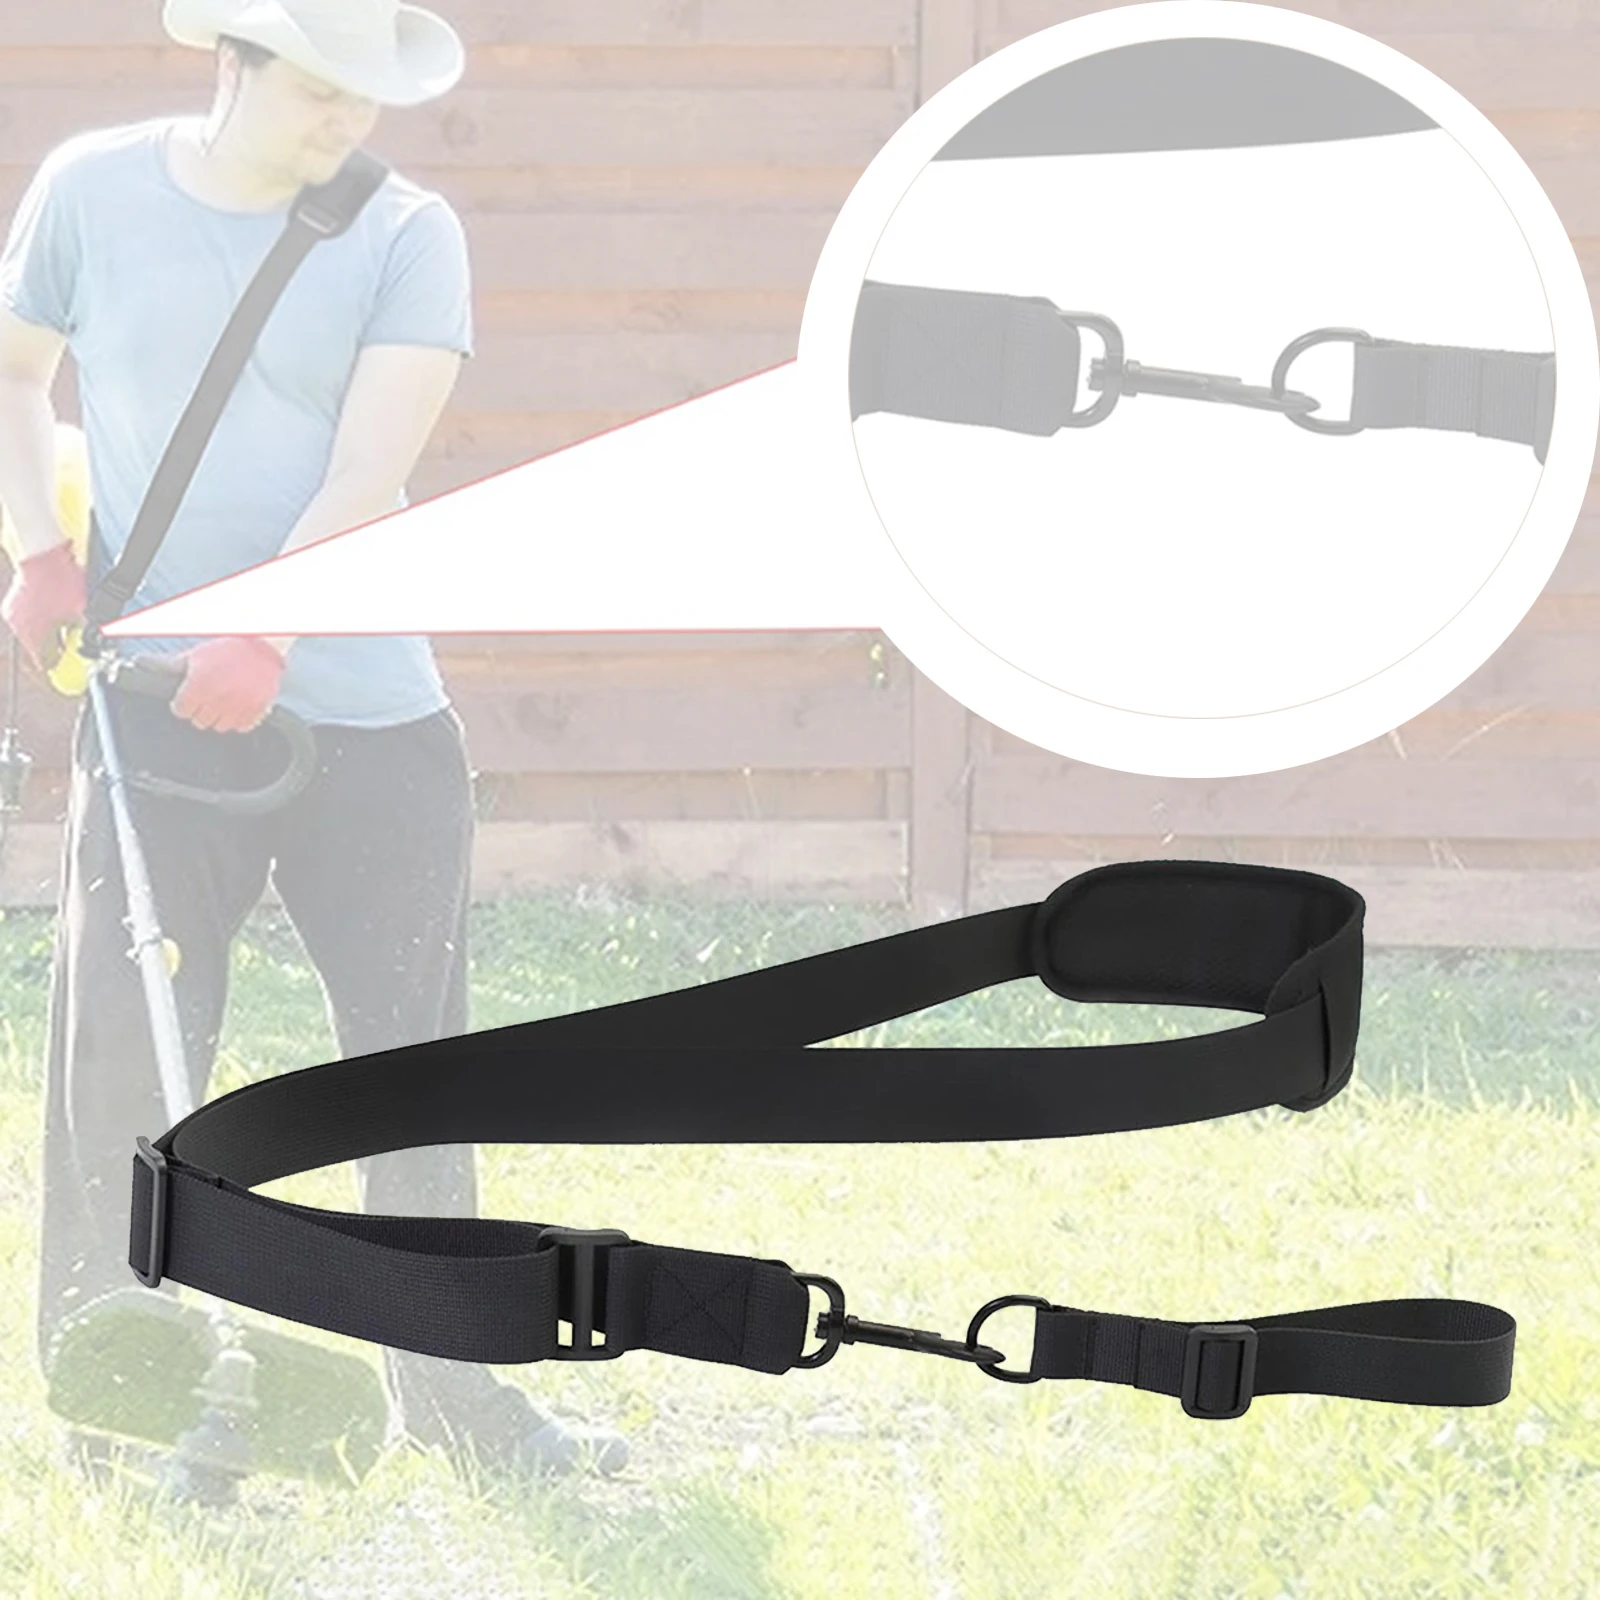 1Pc Black Strimmer Shoulder Harness Strap Lawn Mower Cutter Carry with Hook Trimmer Straps Universal